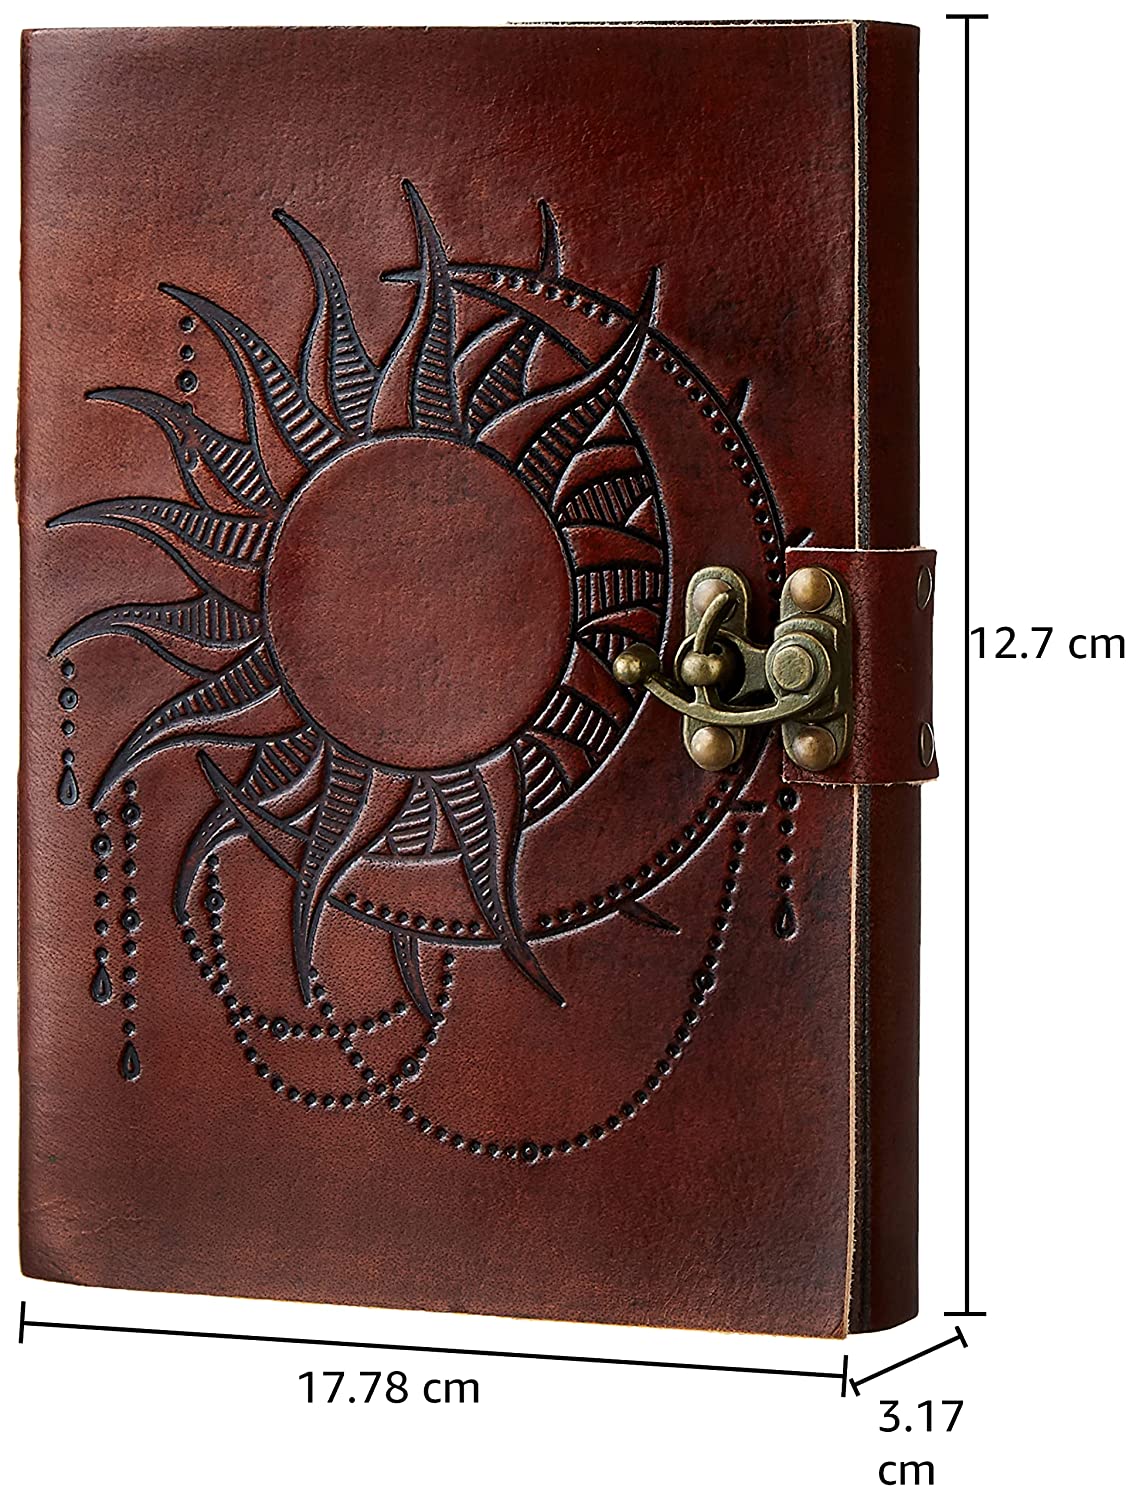 Handcrafted Antique Leather Journal with Embossed Sun & Moon Design with a Vintage Lock